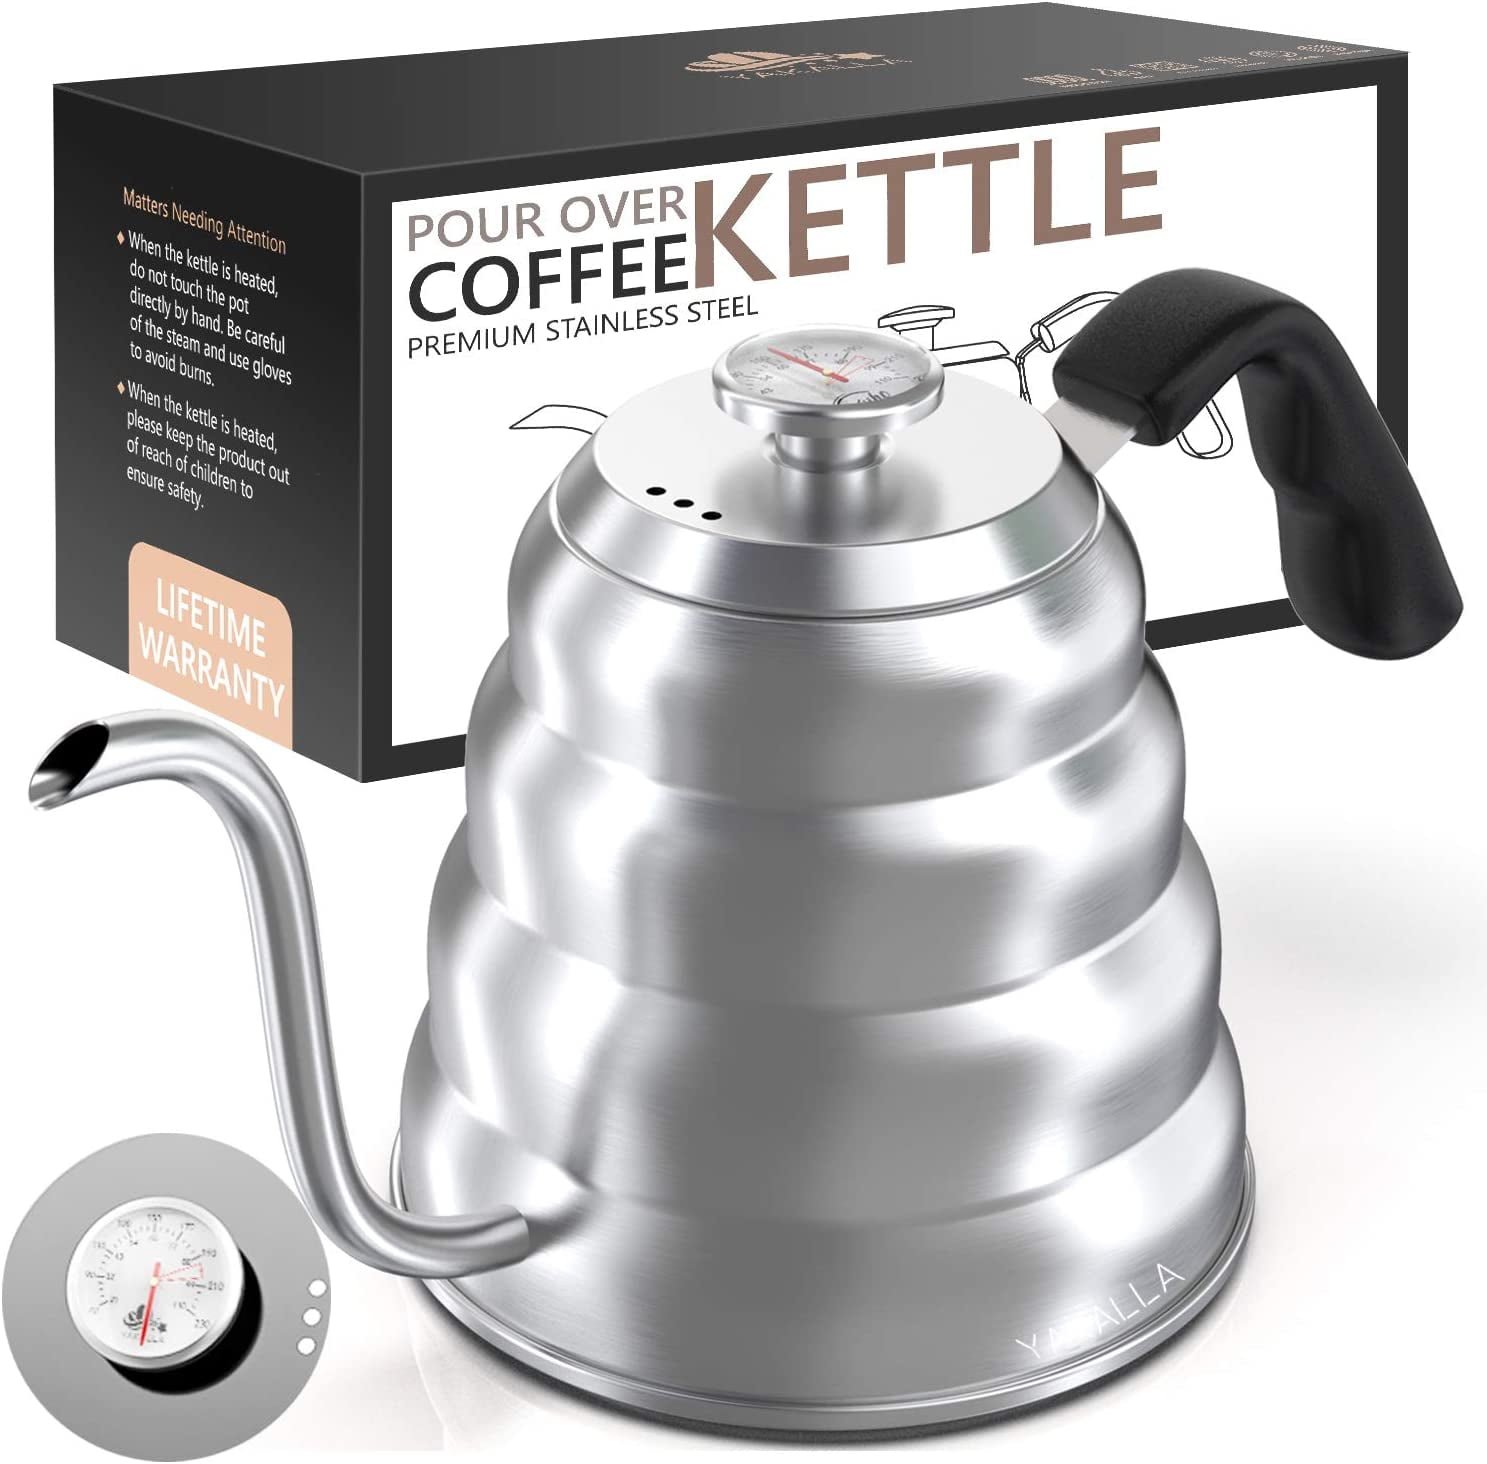 Premium Stainless Steel Gooseneck Kettle - 2L Capacity Pour Over Coffee  Maker with Integrated - Ergonomic Teapot for Brewing and Barista-Quality